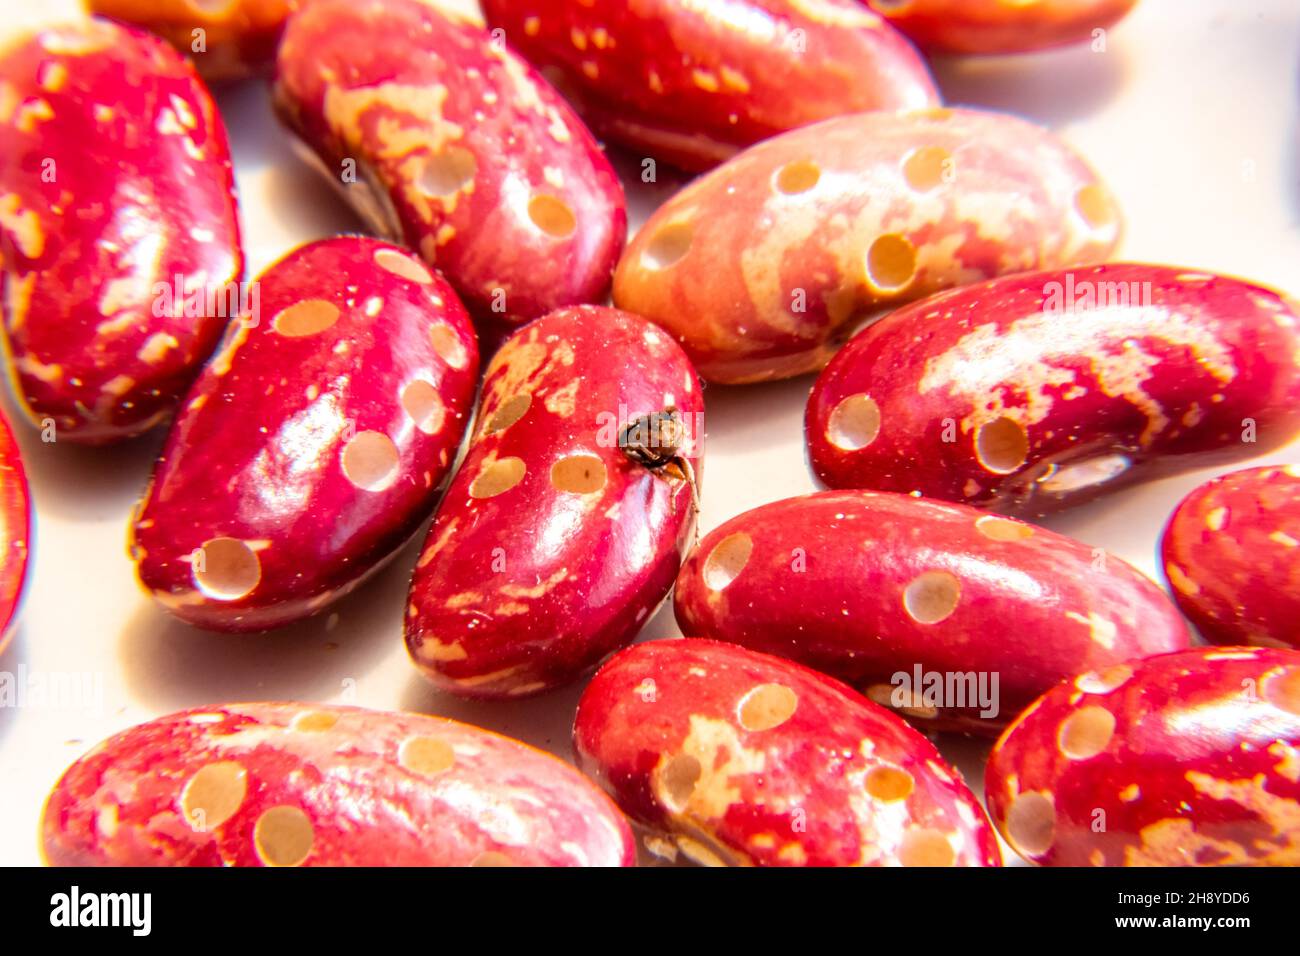 there are beans on the plate, spoiled by an agricultural pest by a bean weevil beetle, the legs of one of the beetles are visible from the bean hole, Stock Photo